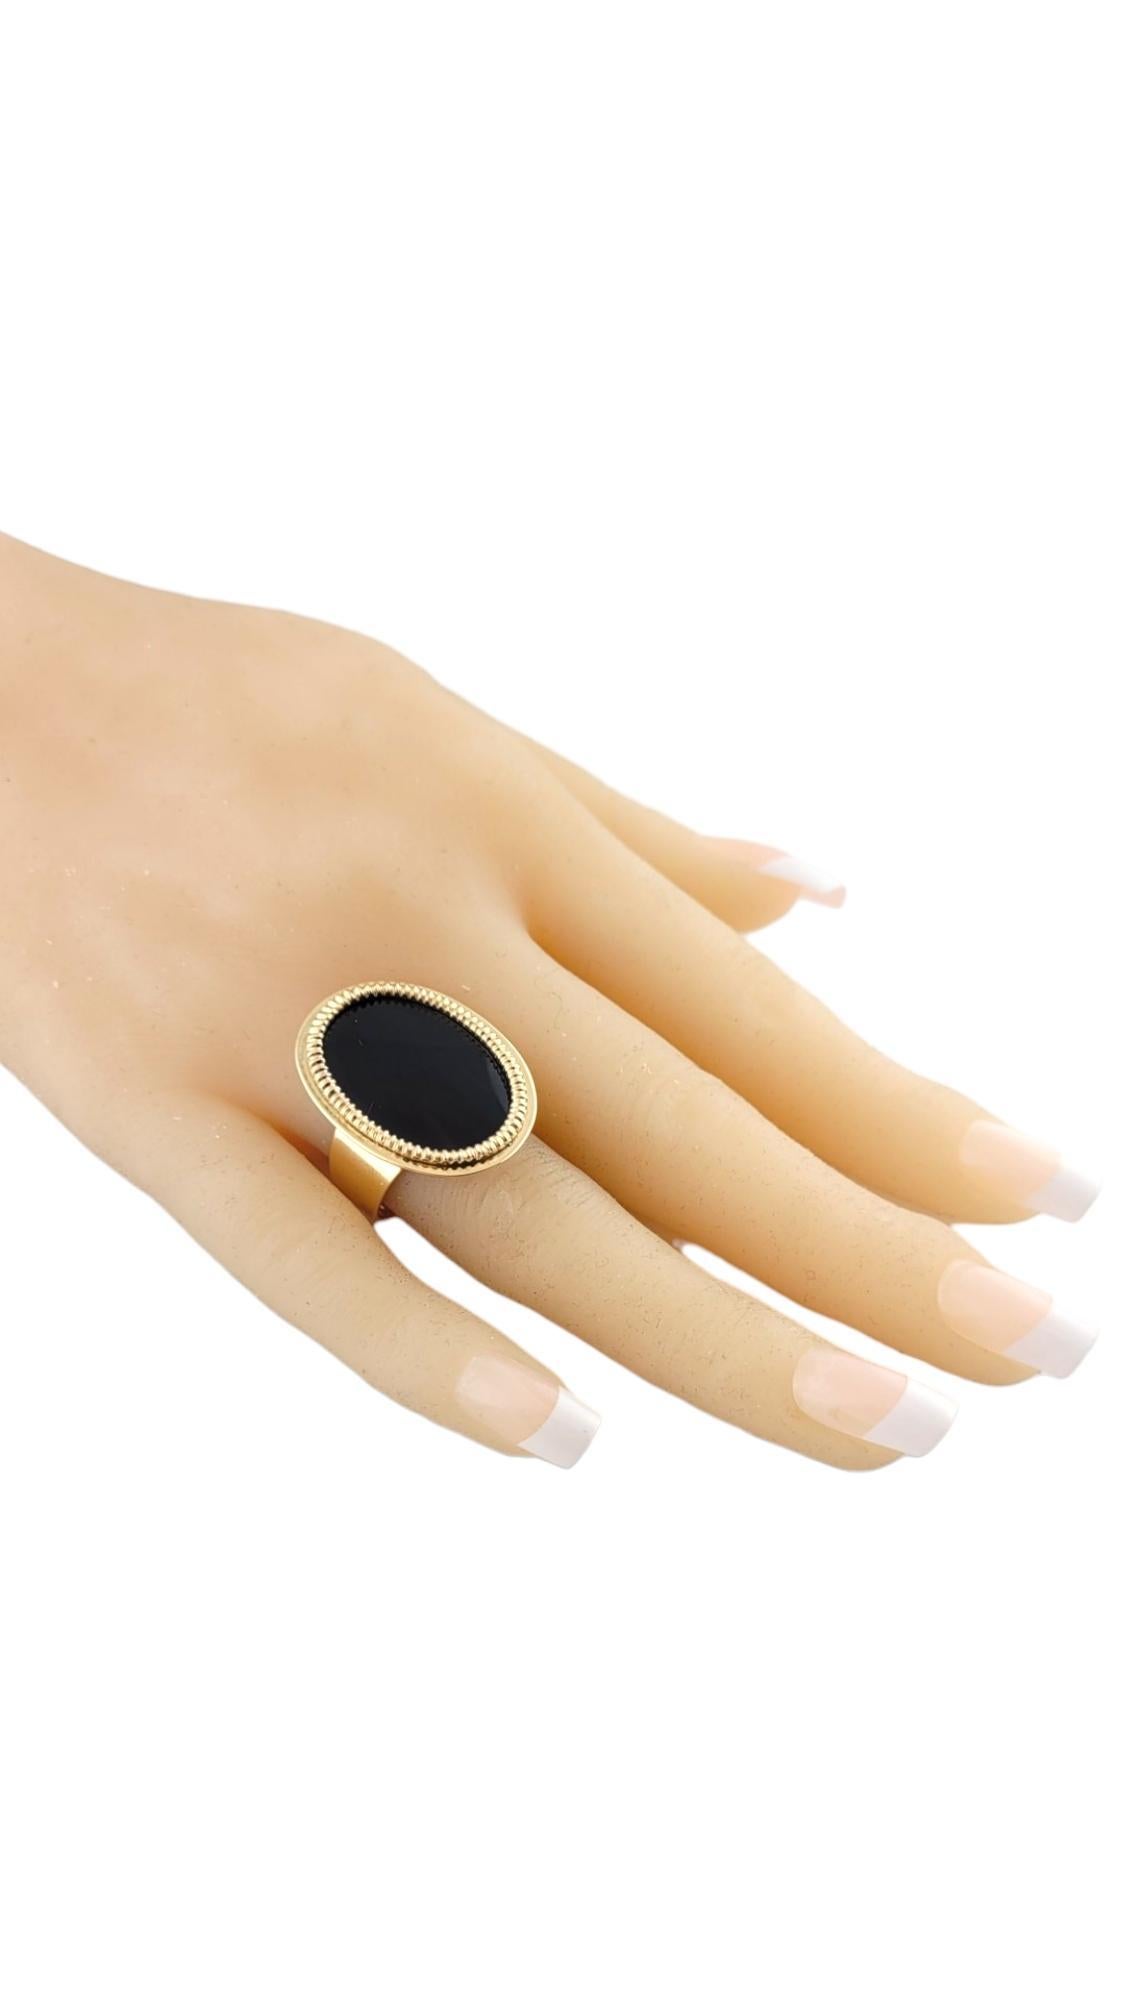 14K Yellow Gold Oval Onyx Ring Size 7.75 #16162 For Sale 1